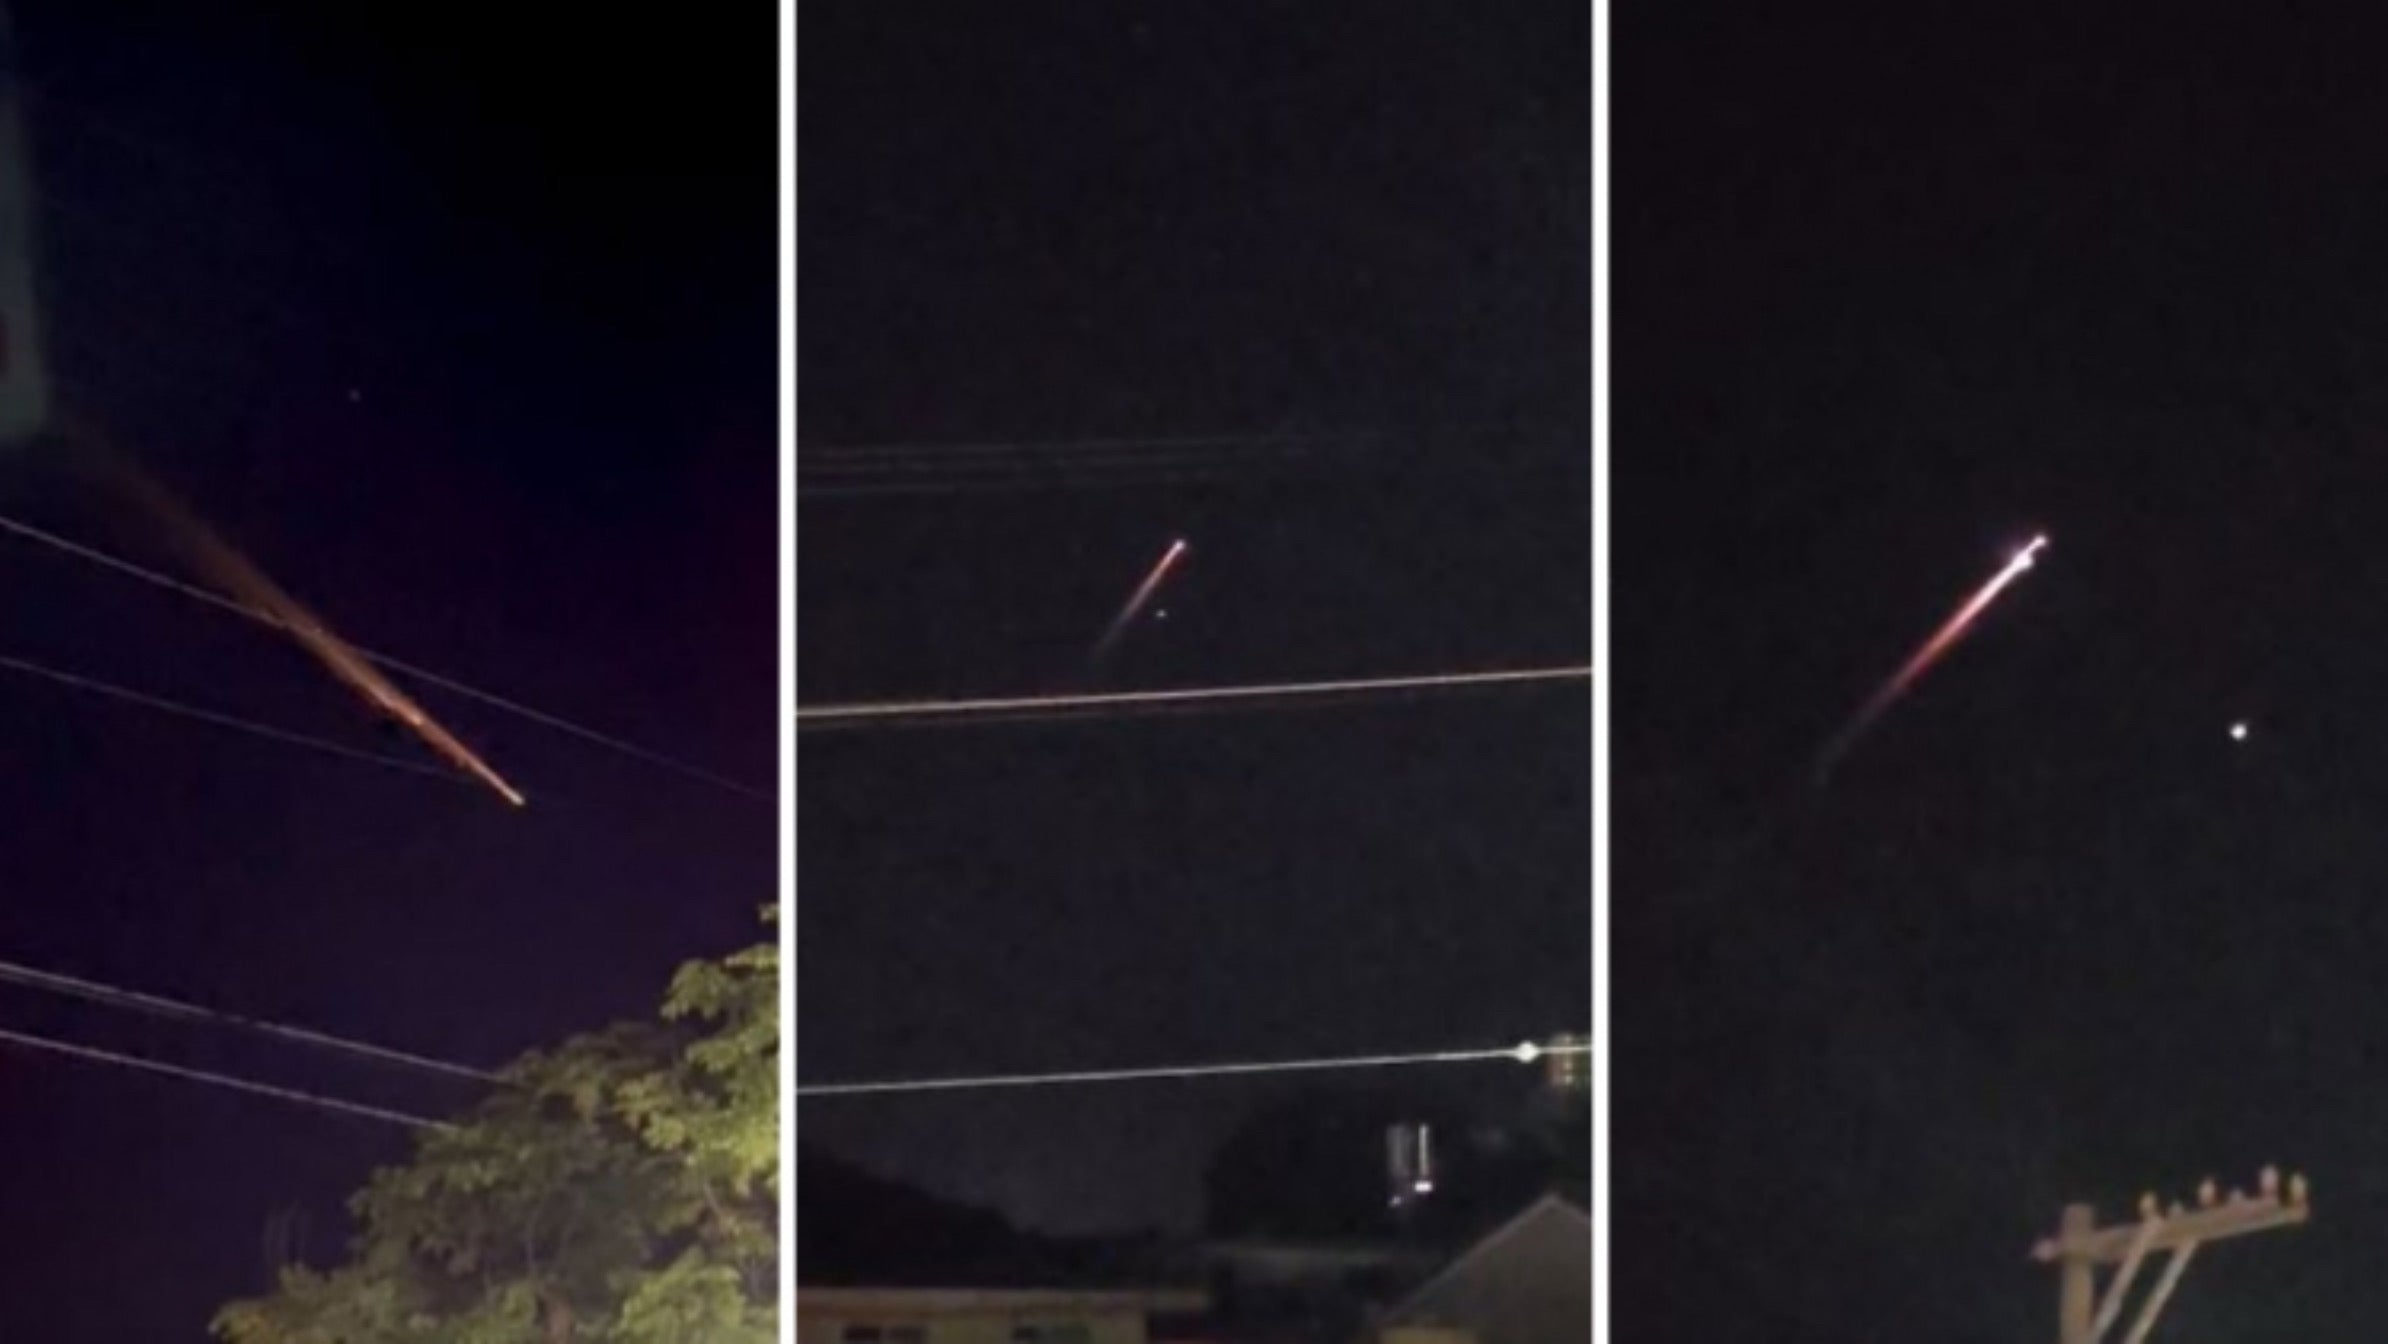 Fireballs in the Japanese sky: possibly debris from a Chinese rocket, Magnate Daily